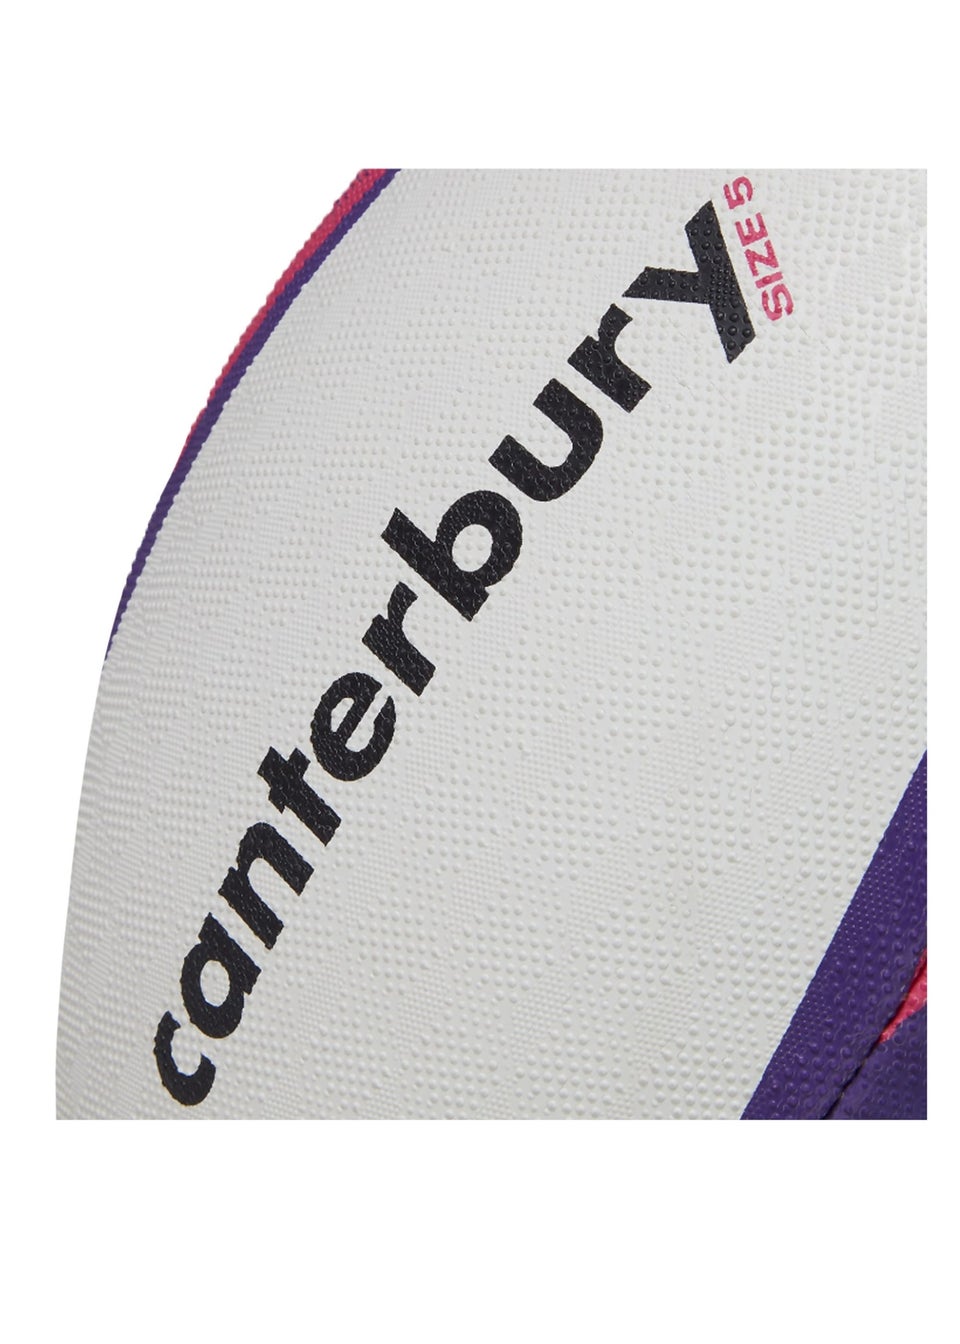 Canterbury White Mentre Rugby Ball